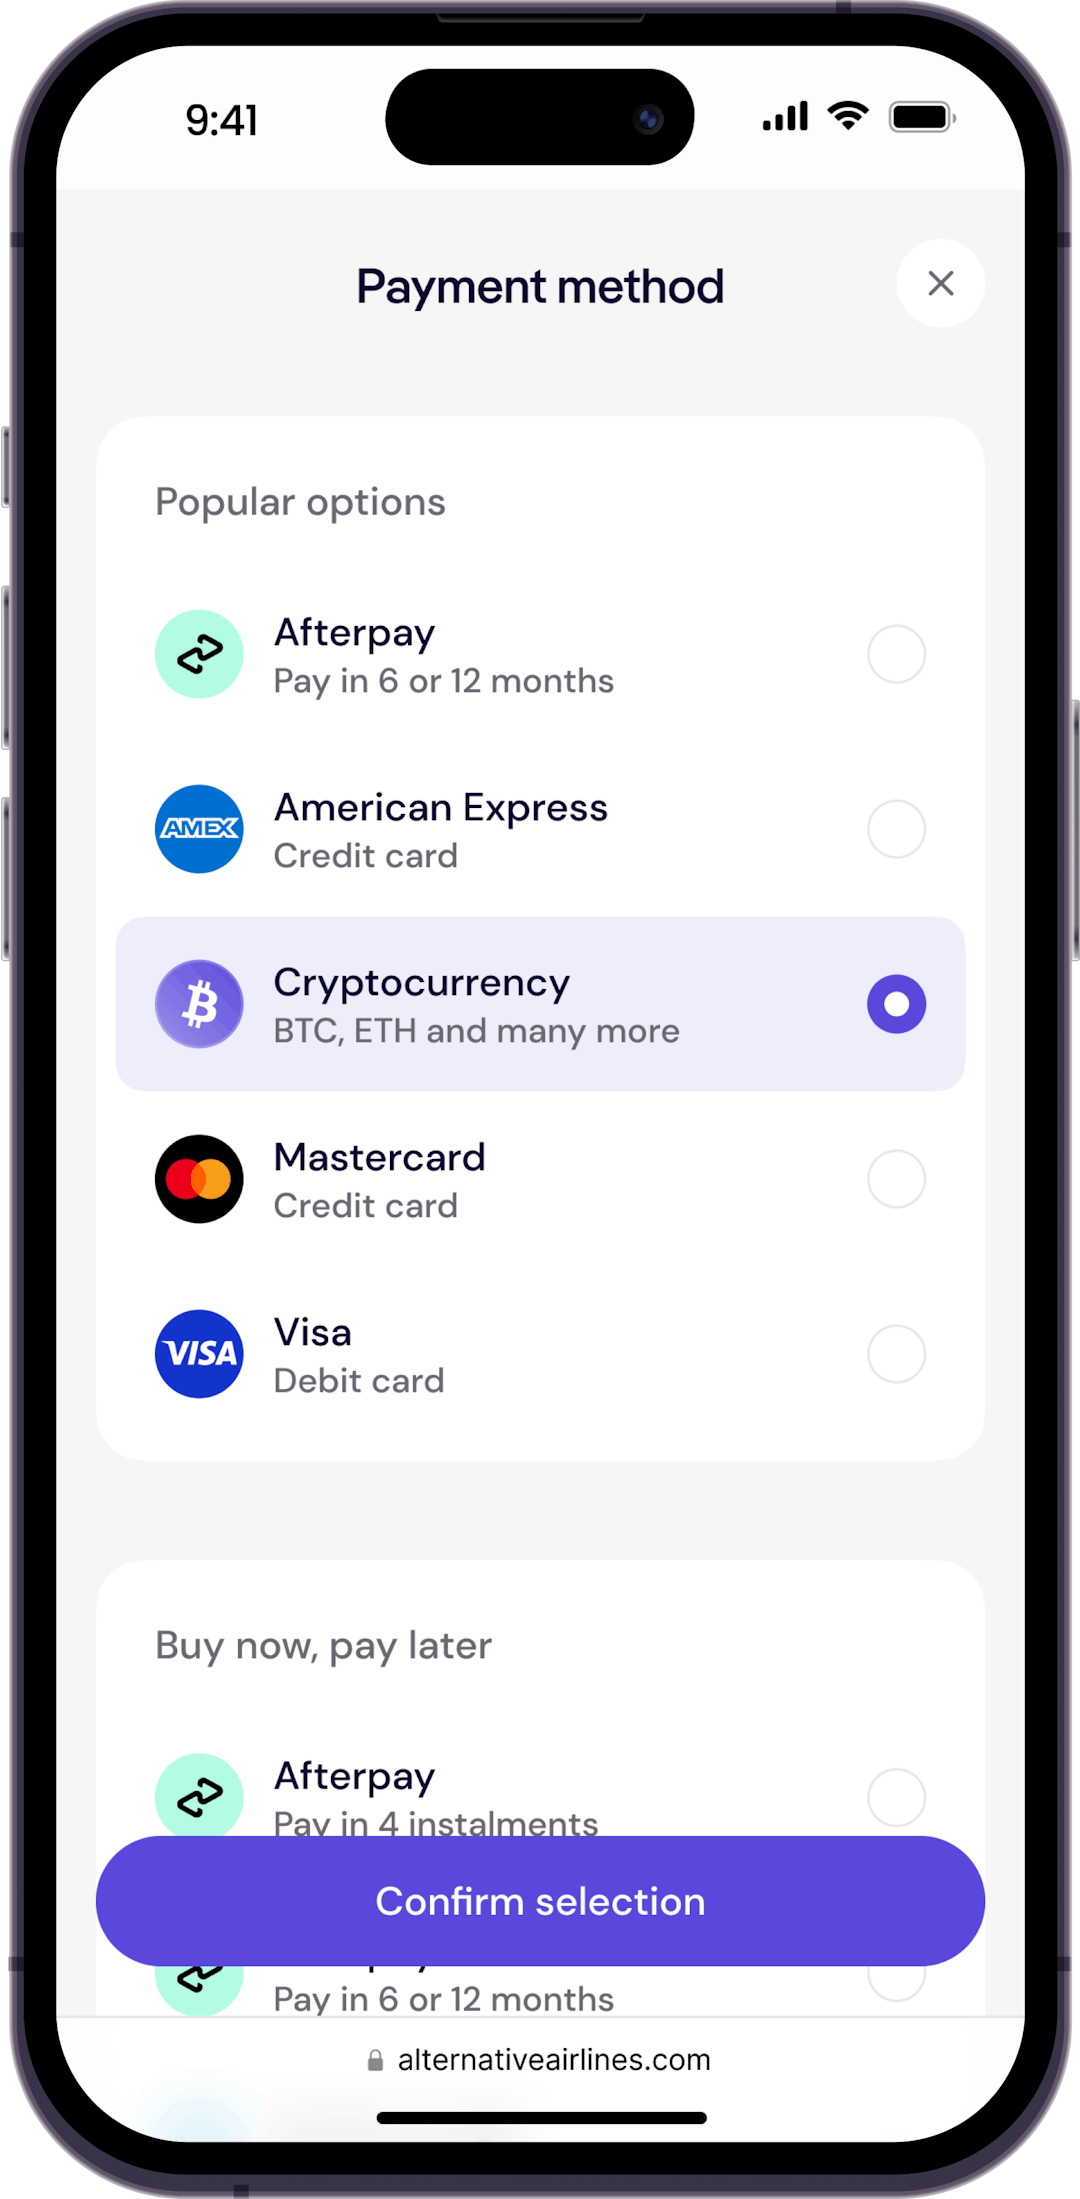 Step 2 - Select Cryptocurrency